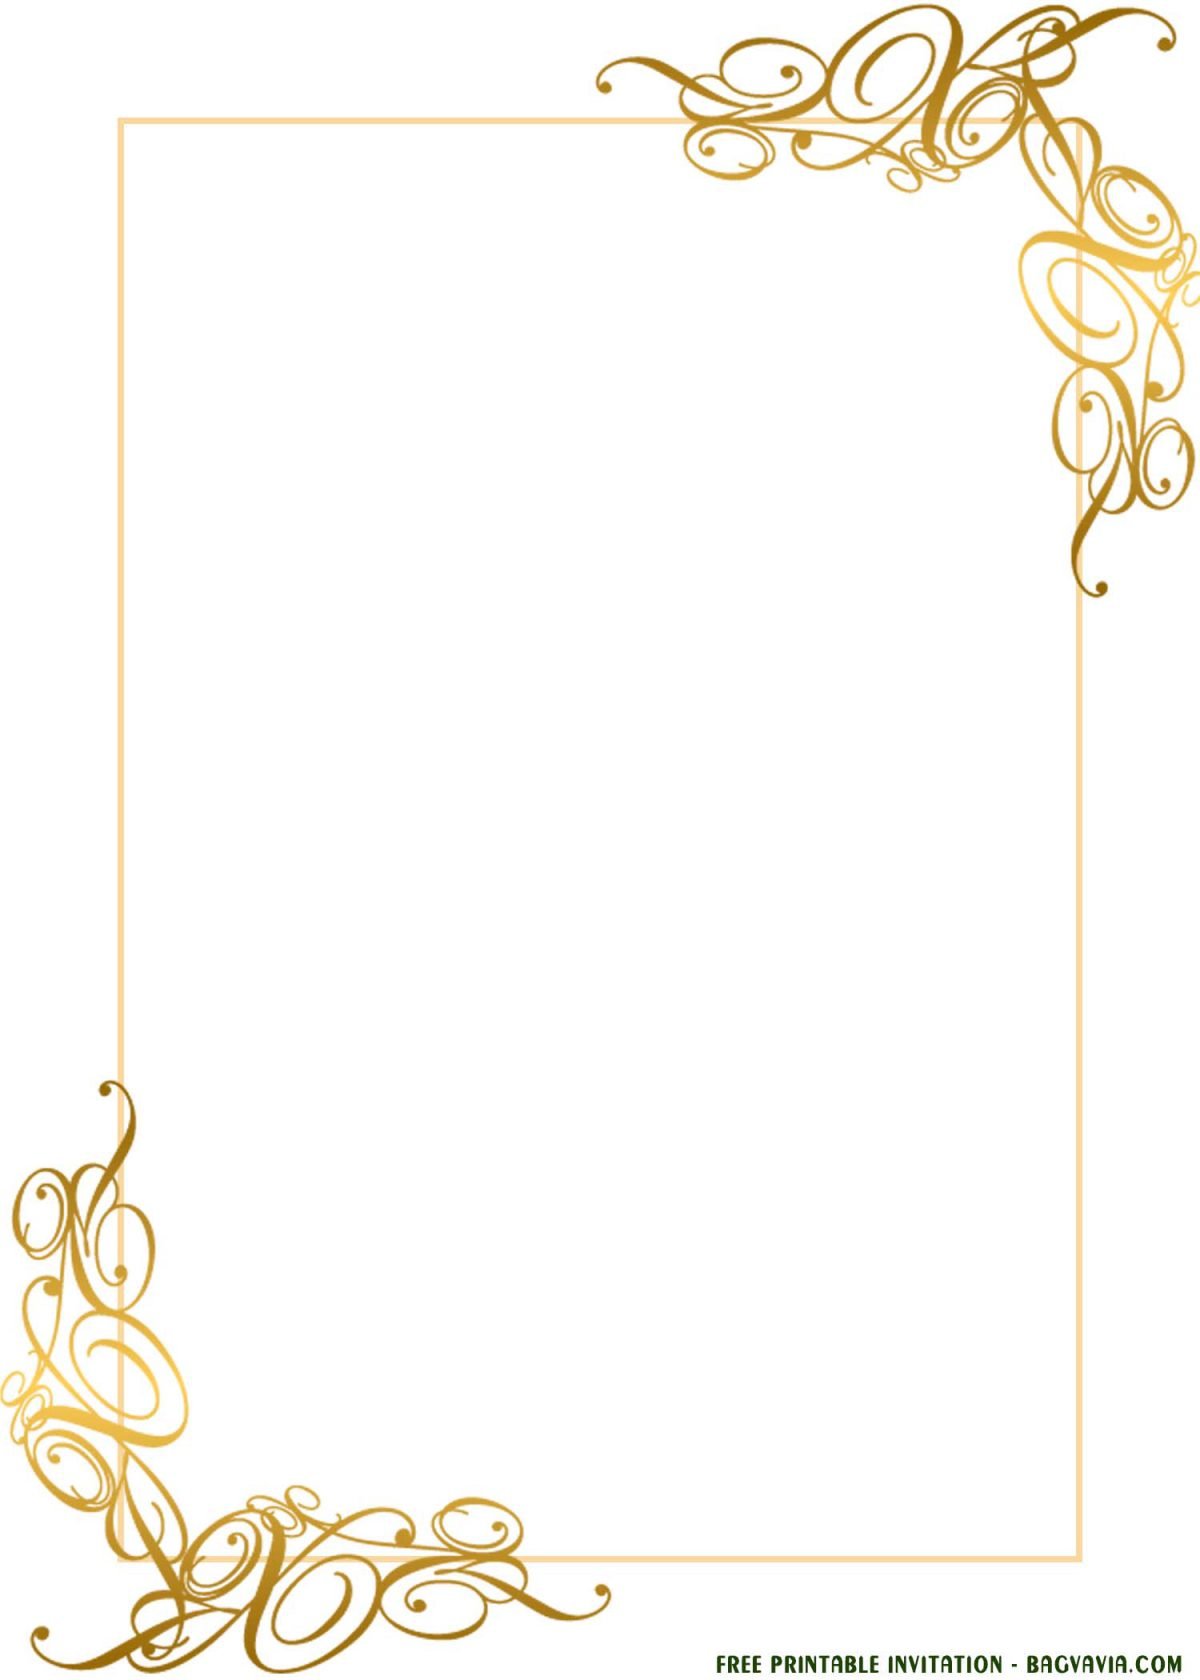 black-and-gold-invitation-template-free